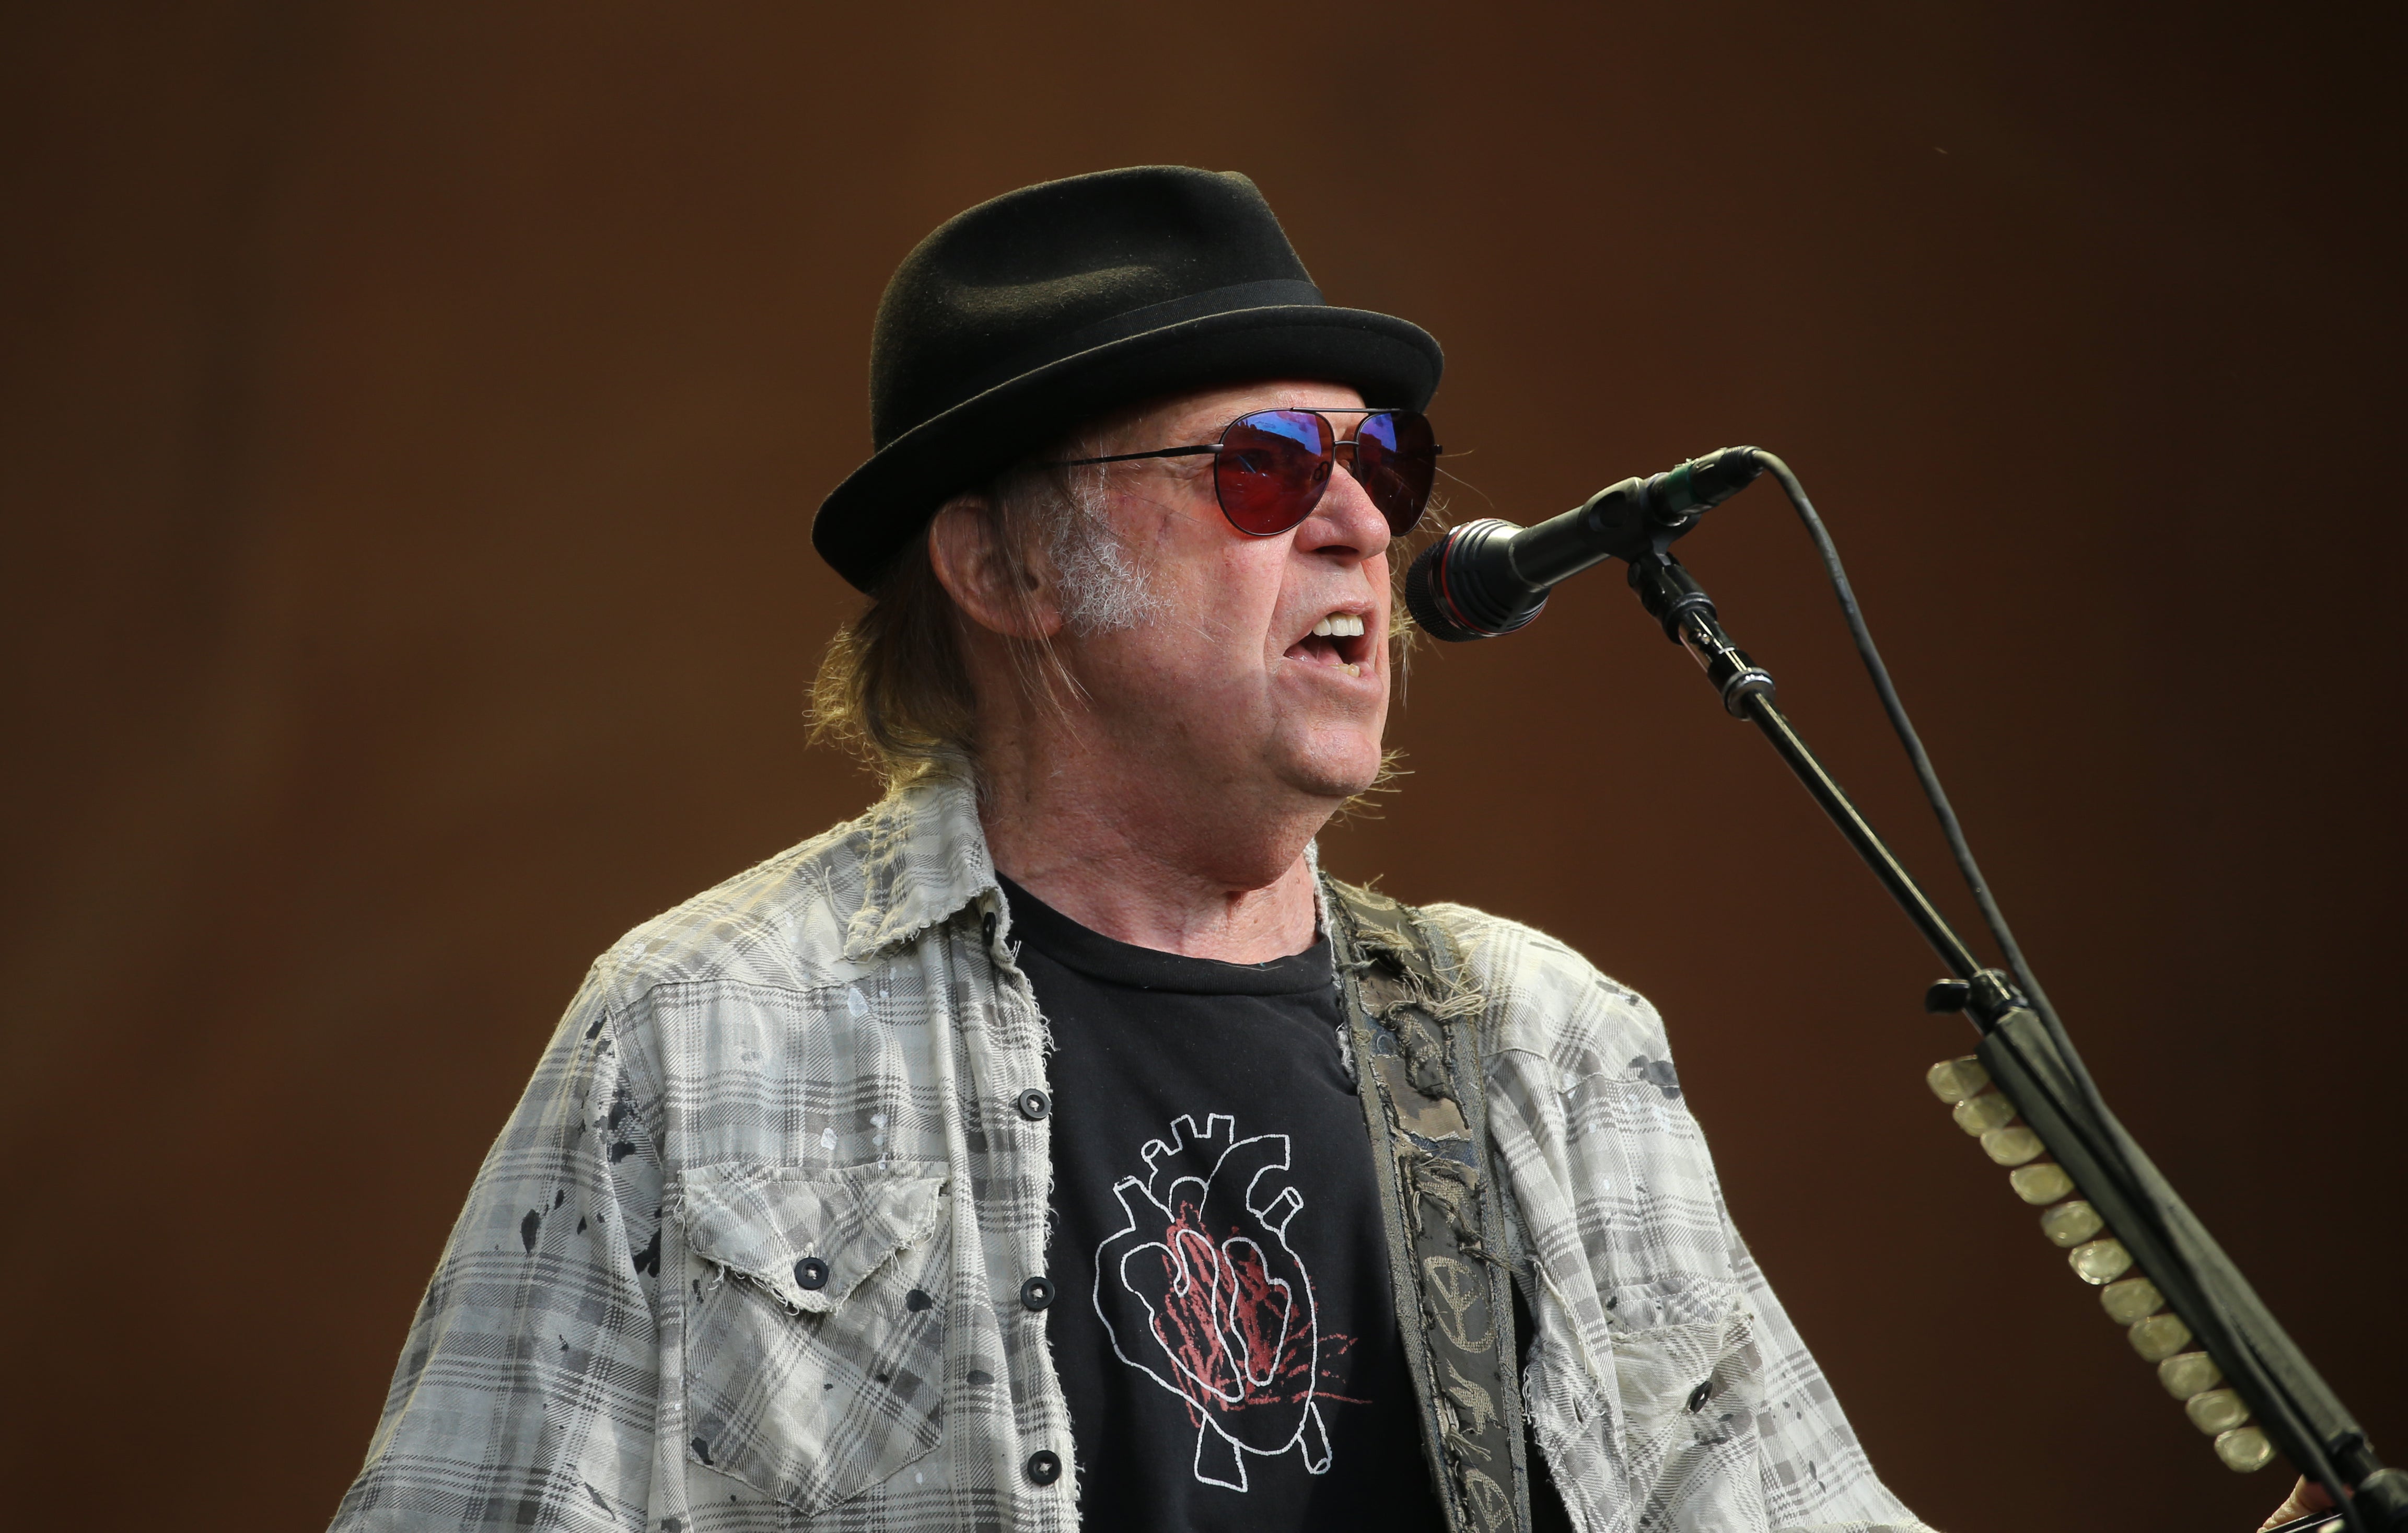 Neil Young’s music is being removed from Spotify after his reported concerns over Covid-19 misinformation (PA)